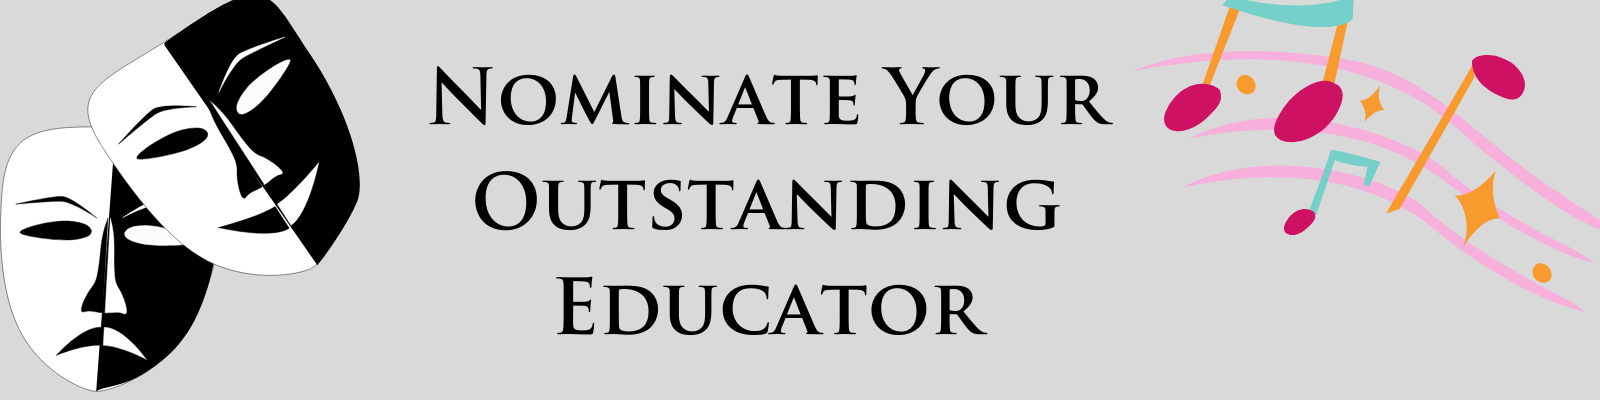 Nominate Your Outstanding Educator.png